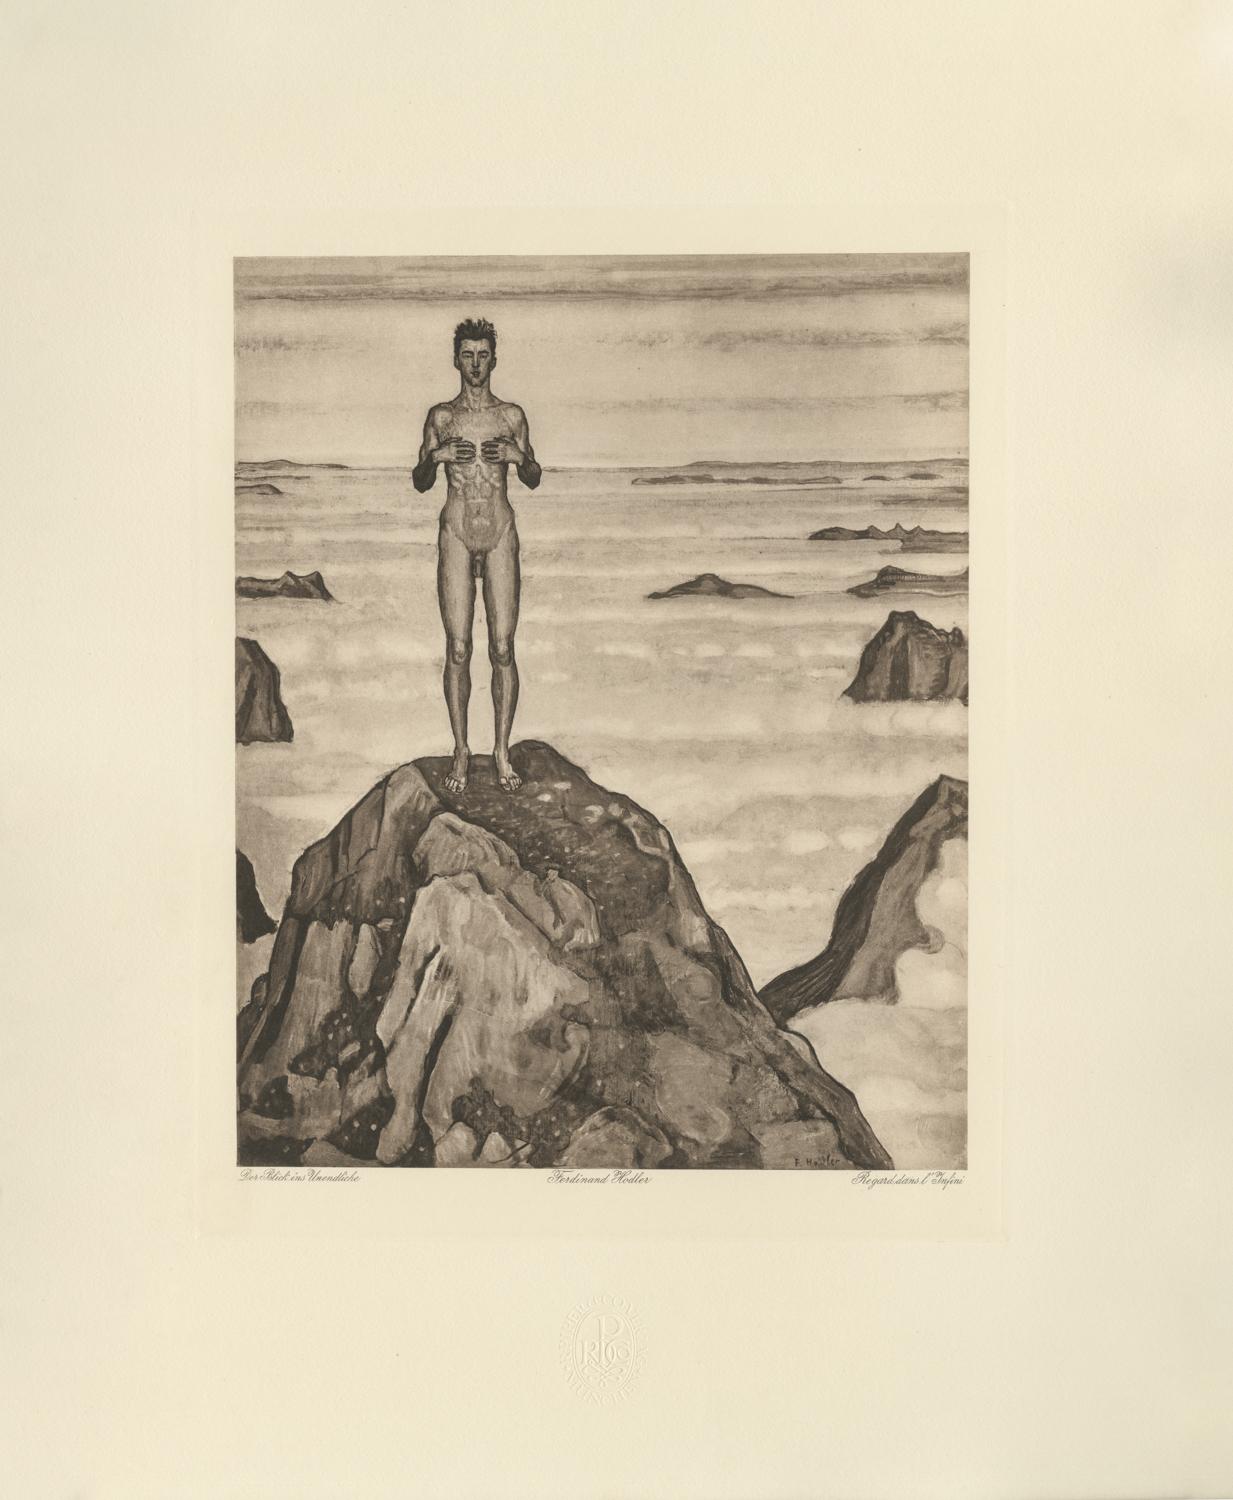 Ferdinand Hodler & R. Piper & Co. Figurative Print - "Looking at Infinity" Copper Plate Heliogravure